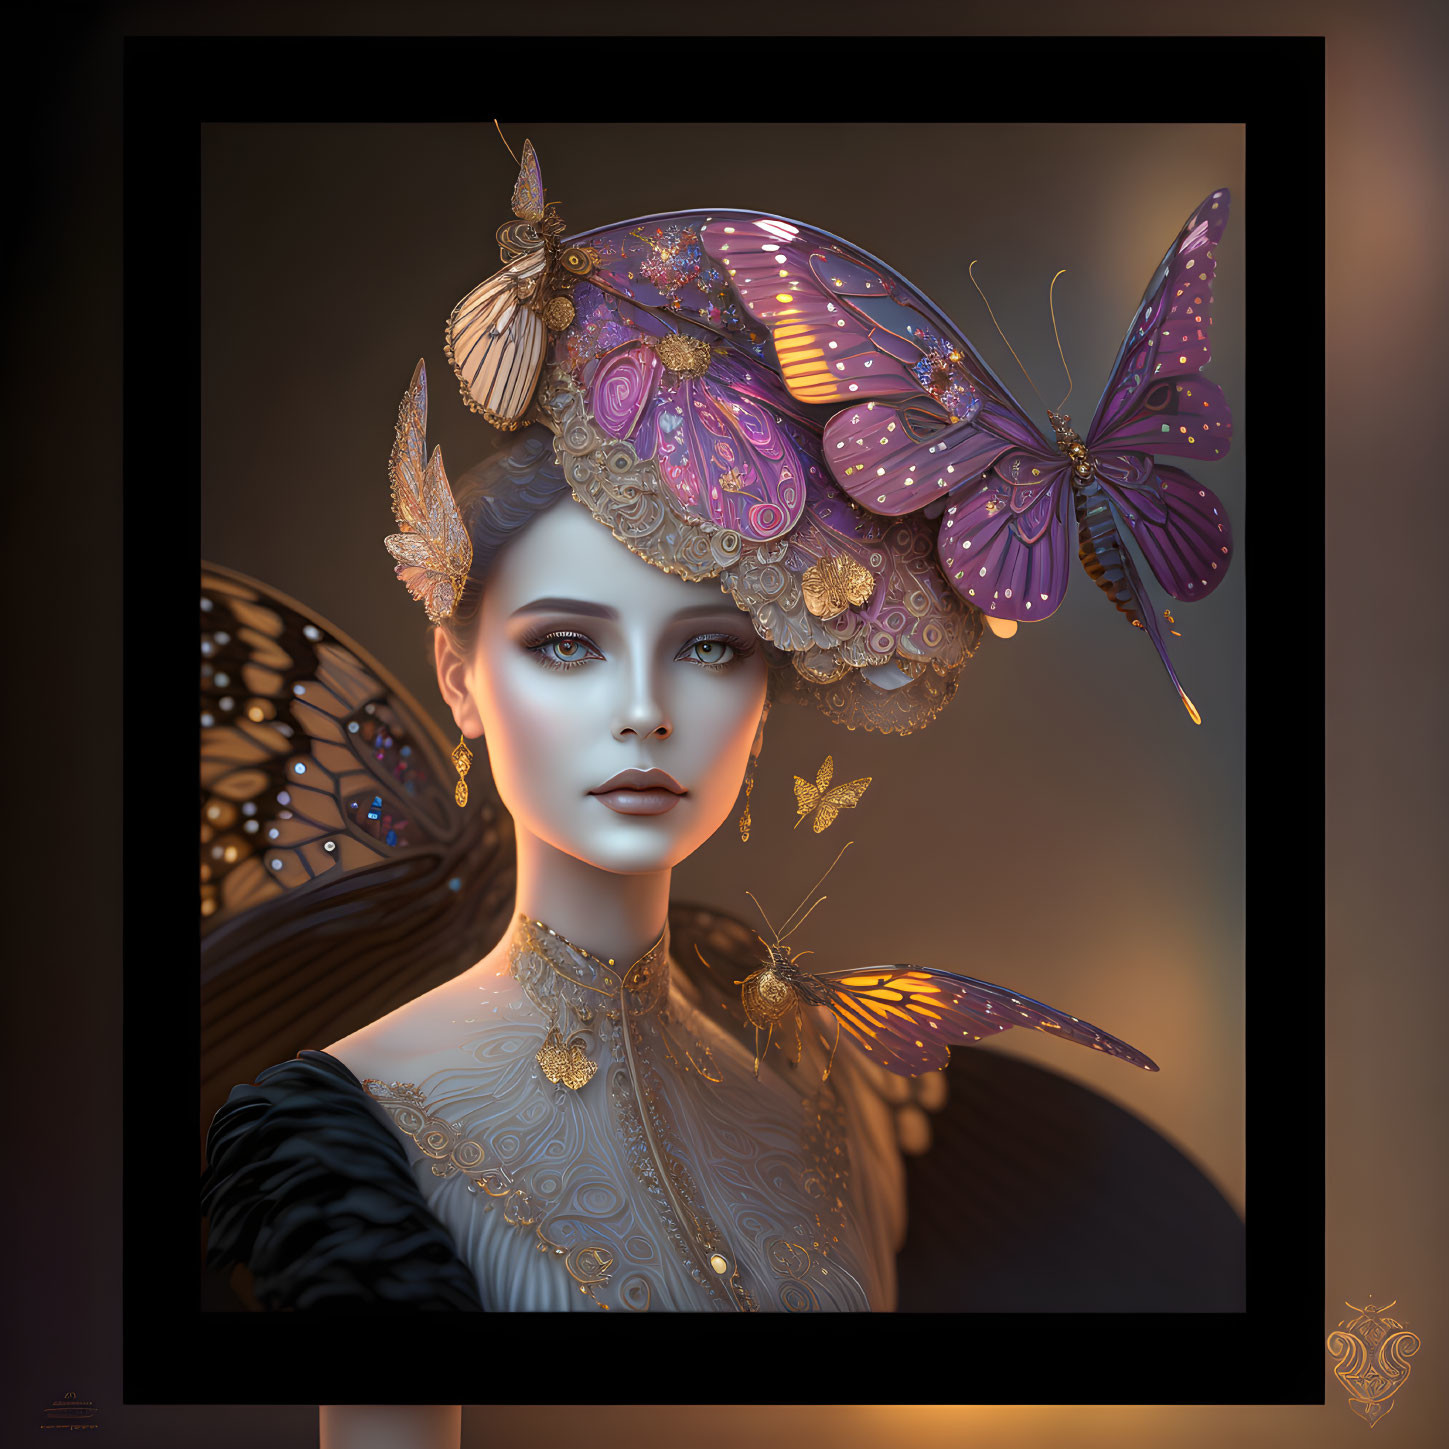 "Pretty woman with butterflies"